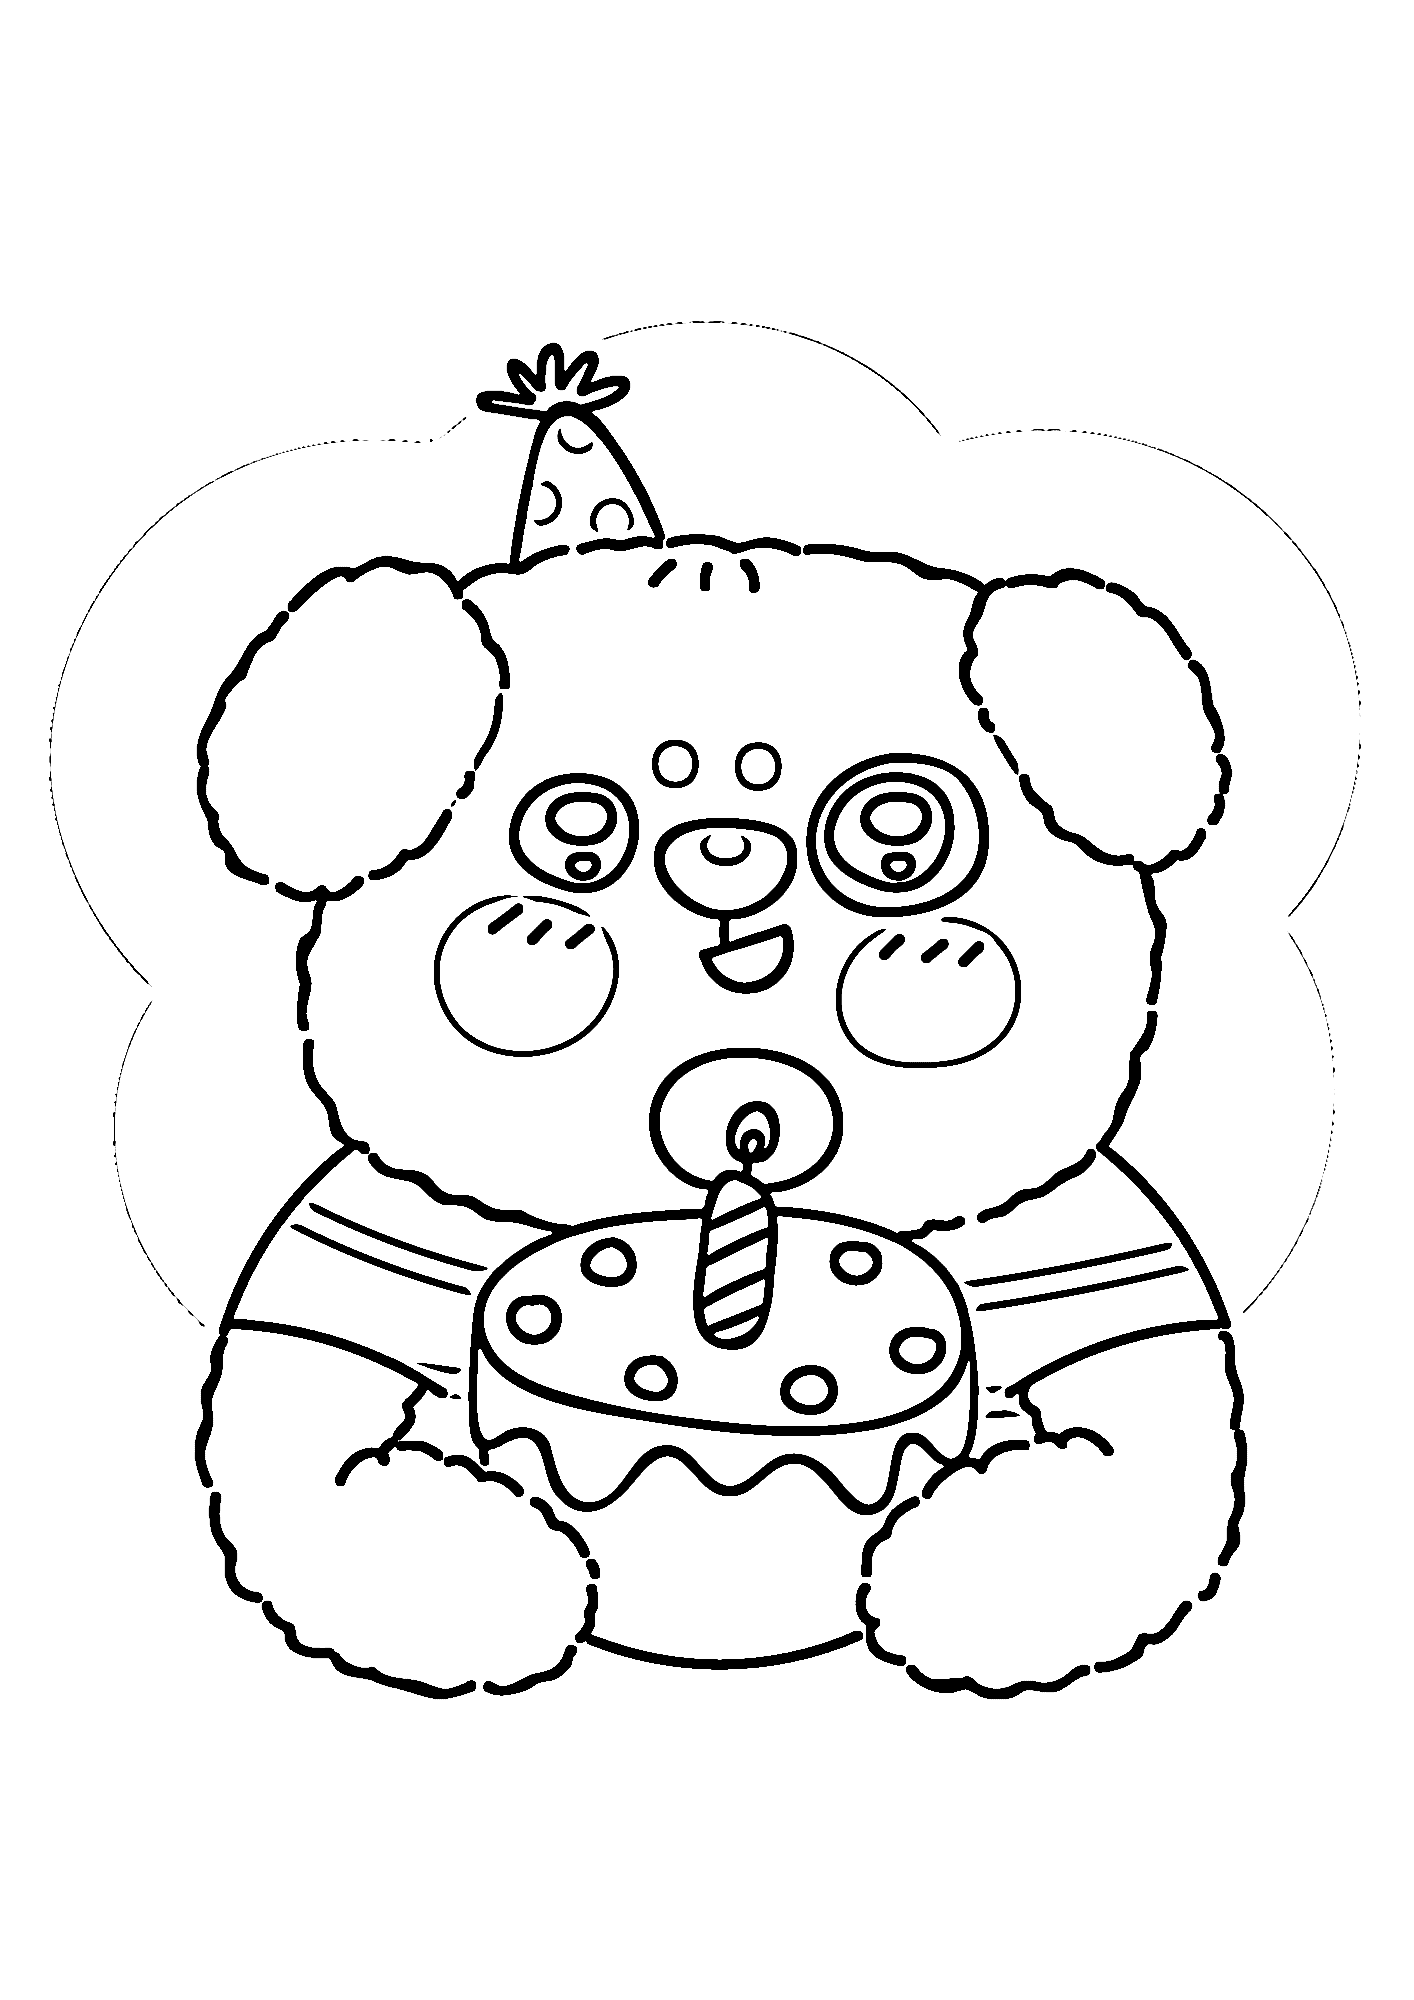 Happy Birthday Dog For Children Image Coloring Pages